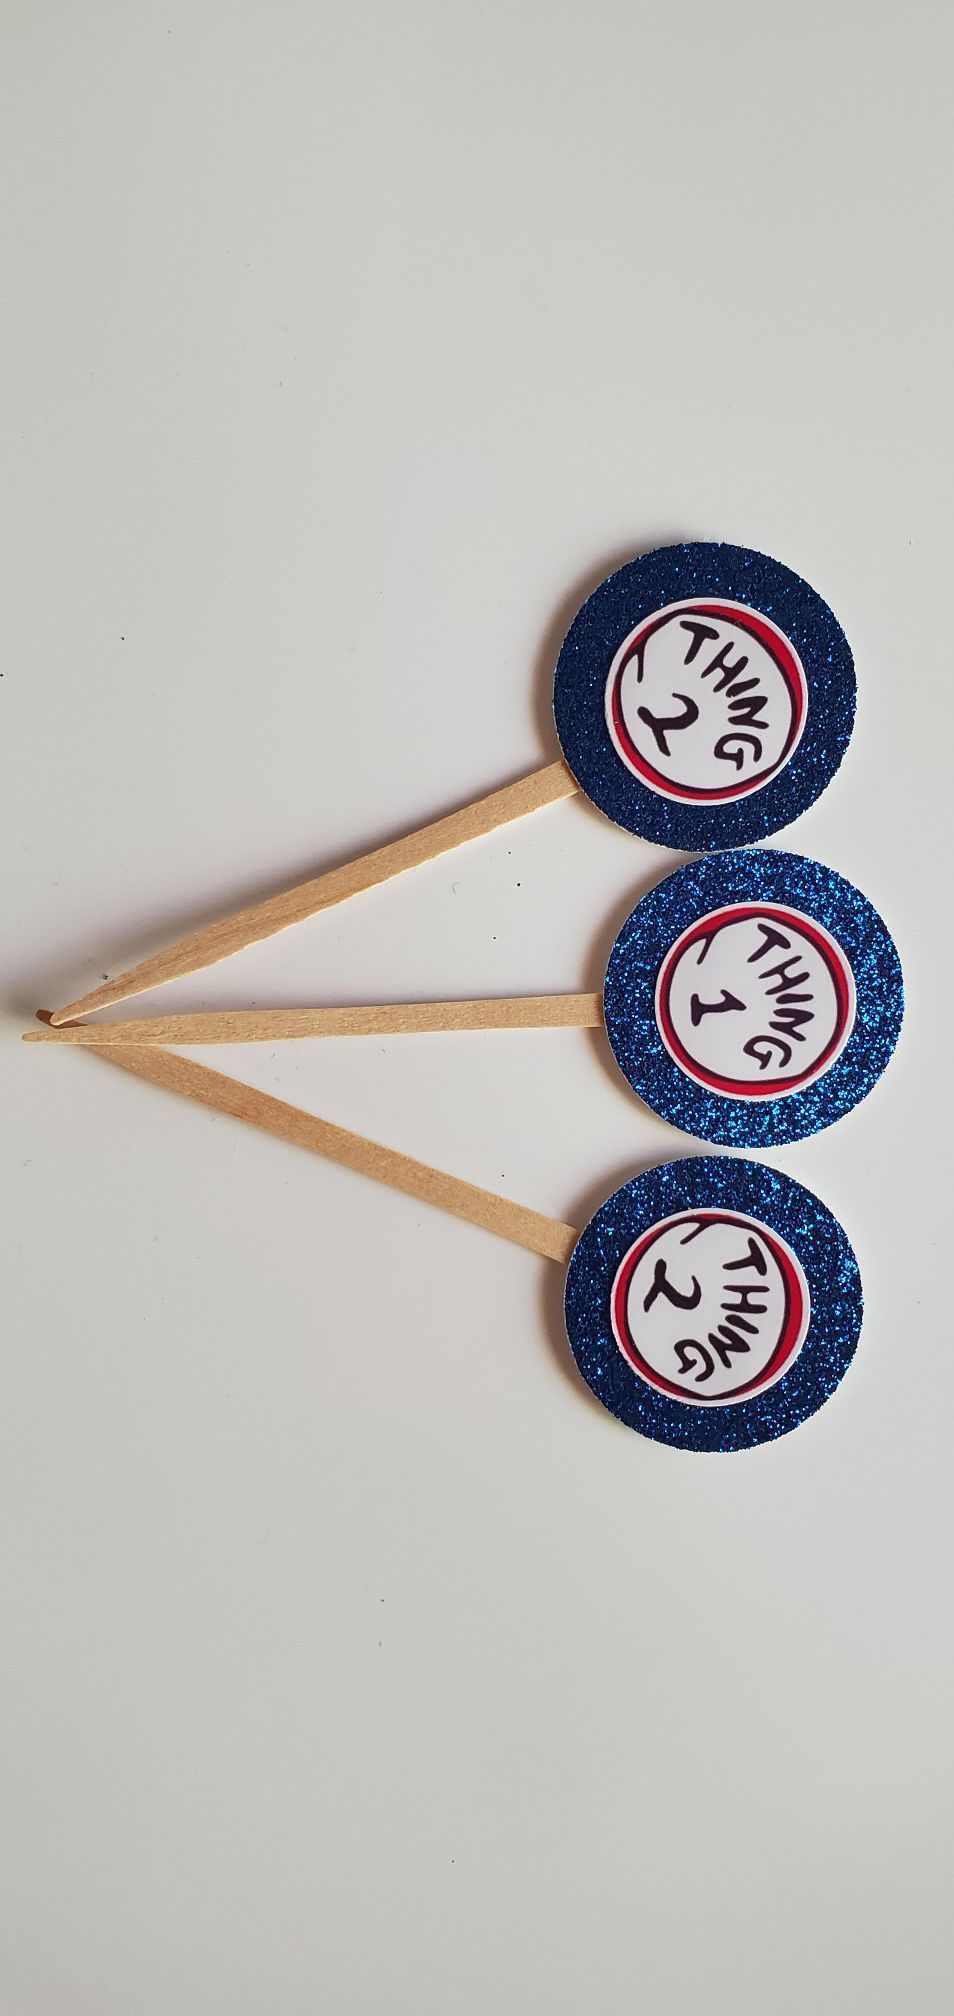 24 Thing 1 thing 2 cupcake toppers birthday party Favors supplies blue glitter